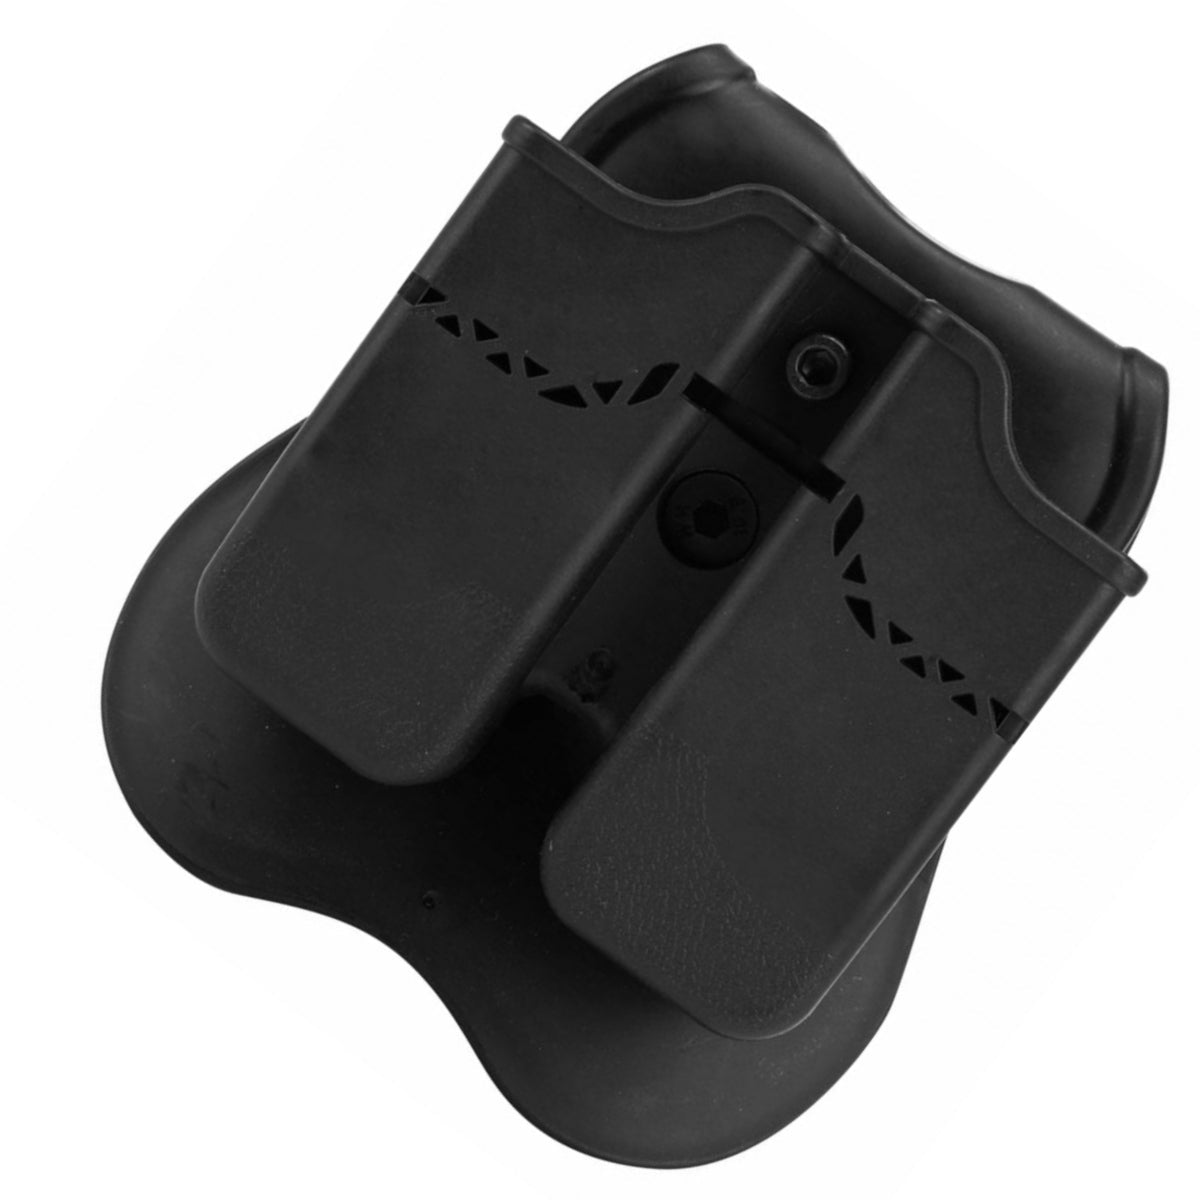 WOSPORT M92 SERIES AIRSOFT DOUBLE MAGAZINE POUCHES